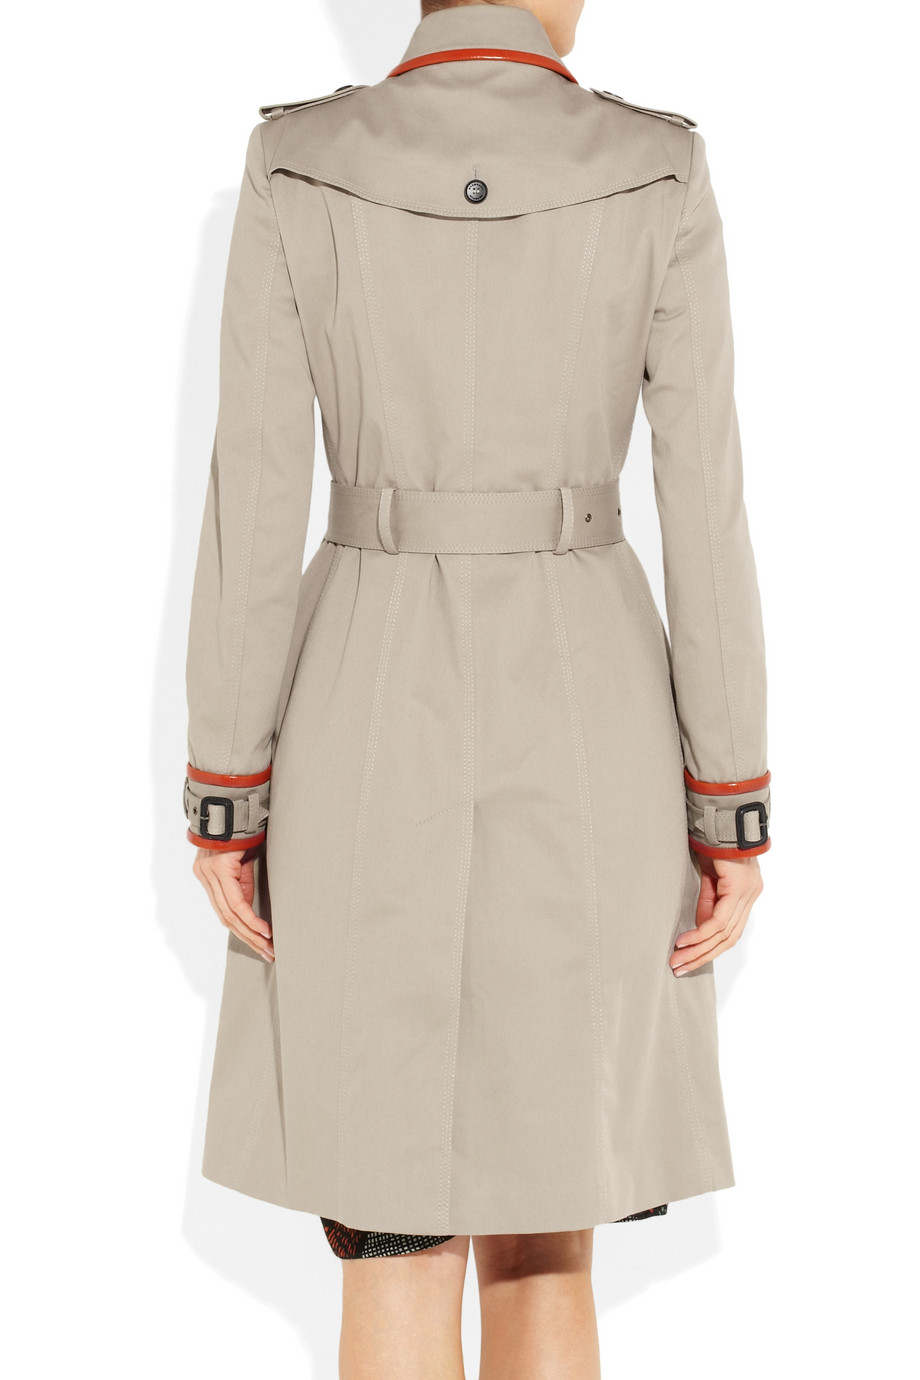 Lyst - Burberry Prorsum Leather-trimmed Cotton-gabardine Trench Coat in ...